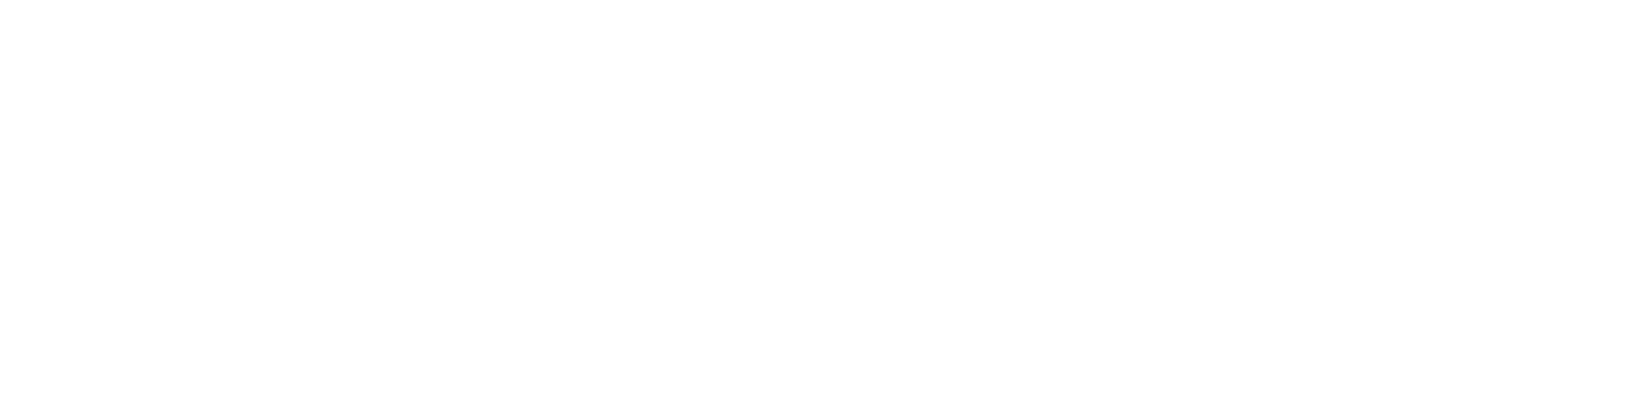 All_for_One_Group_Invertiert